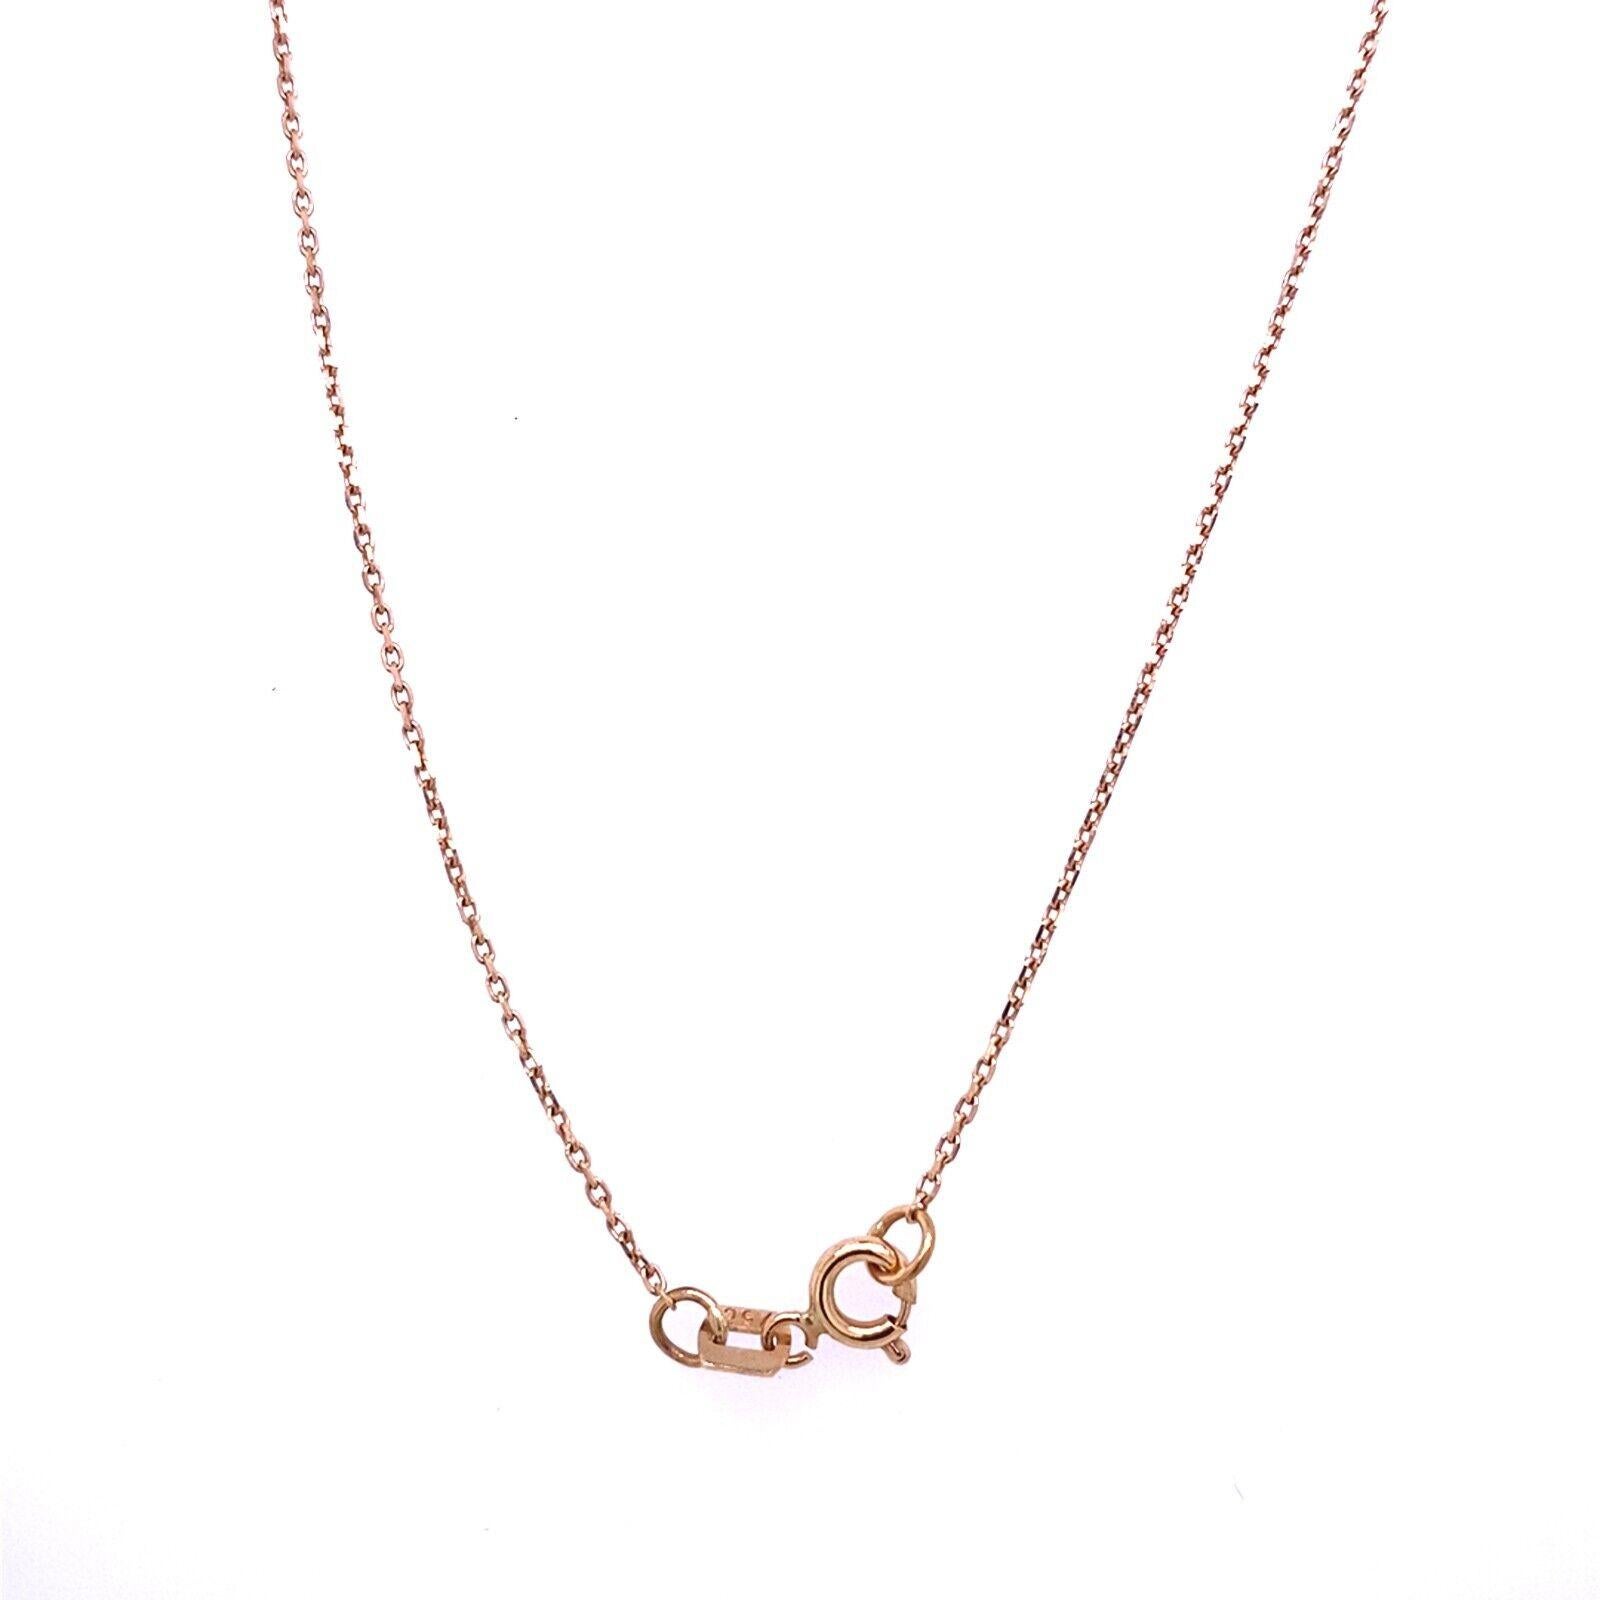 Modern New Fine Quality Diamond Necklace with Diamonds & Chain in 18ct Rose Gold For Sale